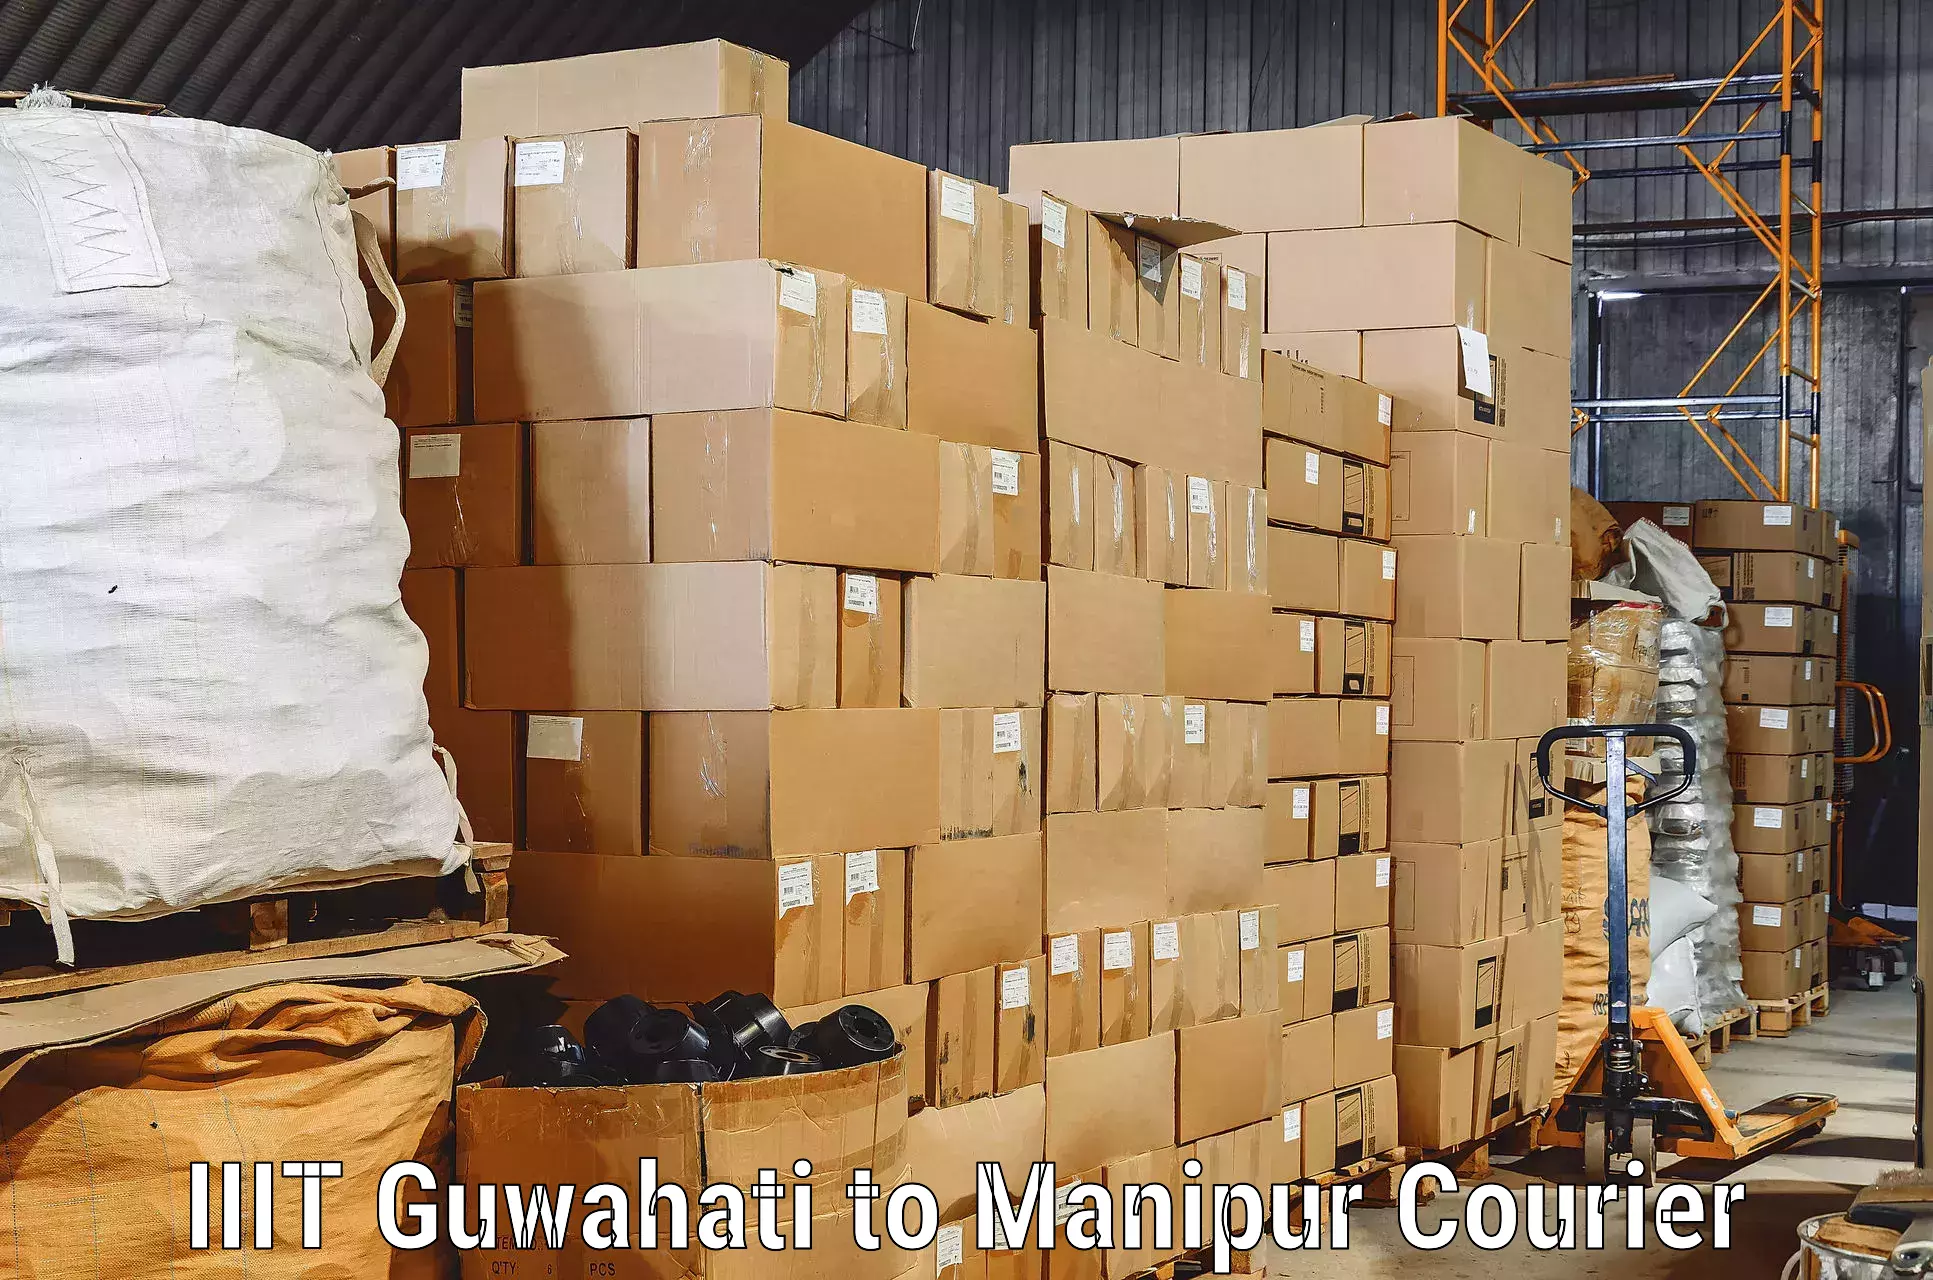 Dependable moving services IIIT Guwahati to Imphal